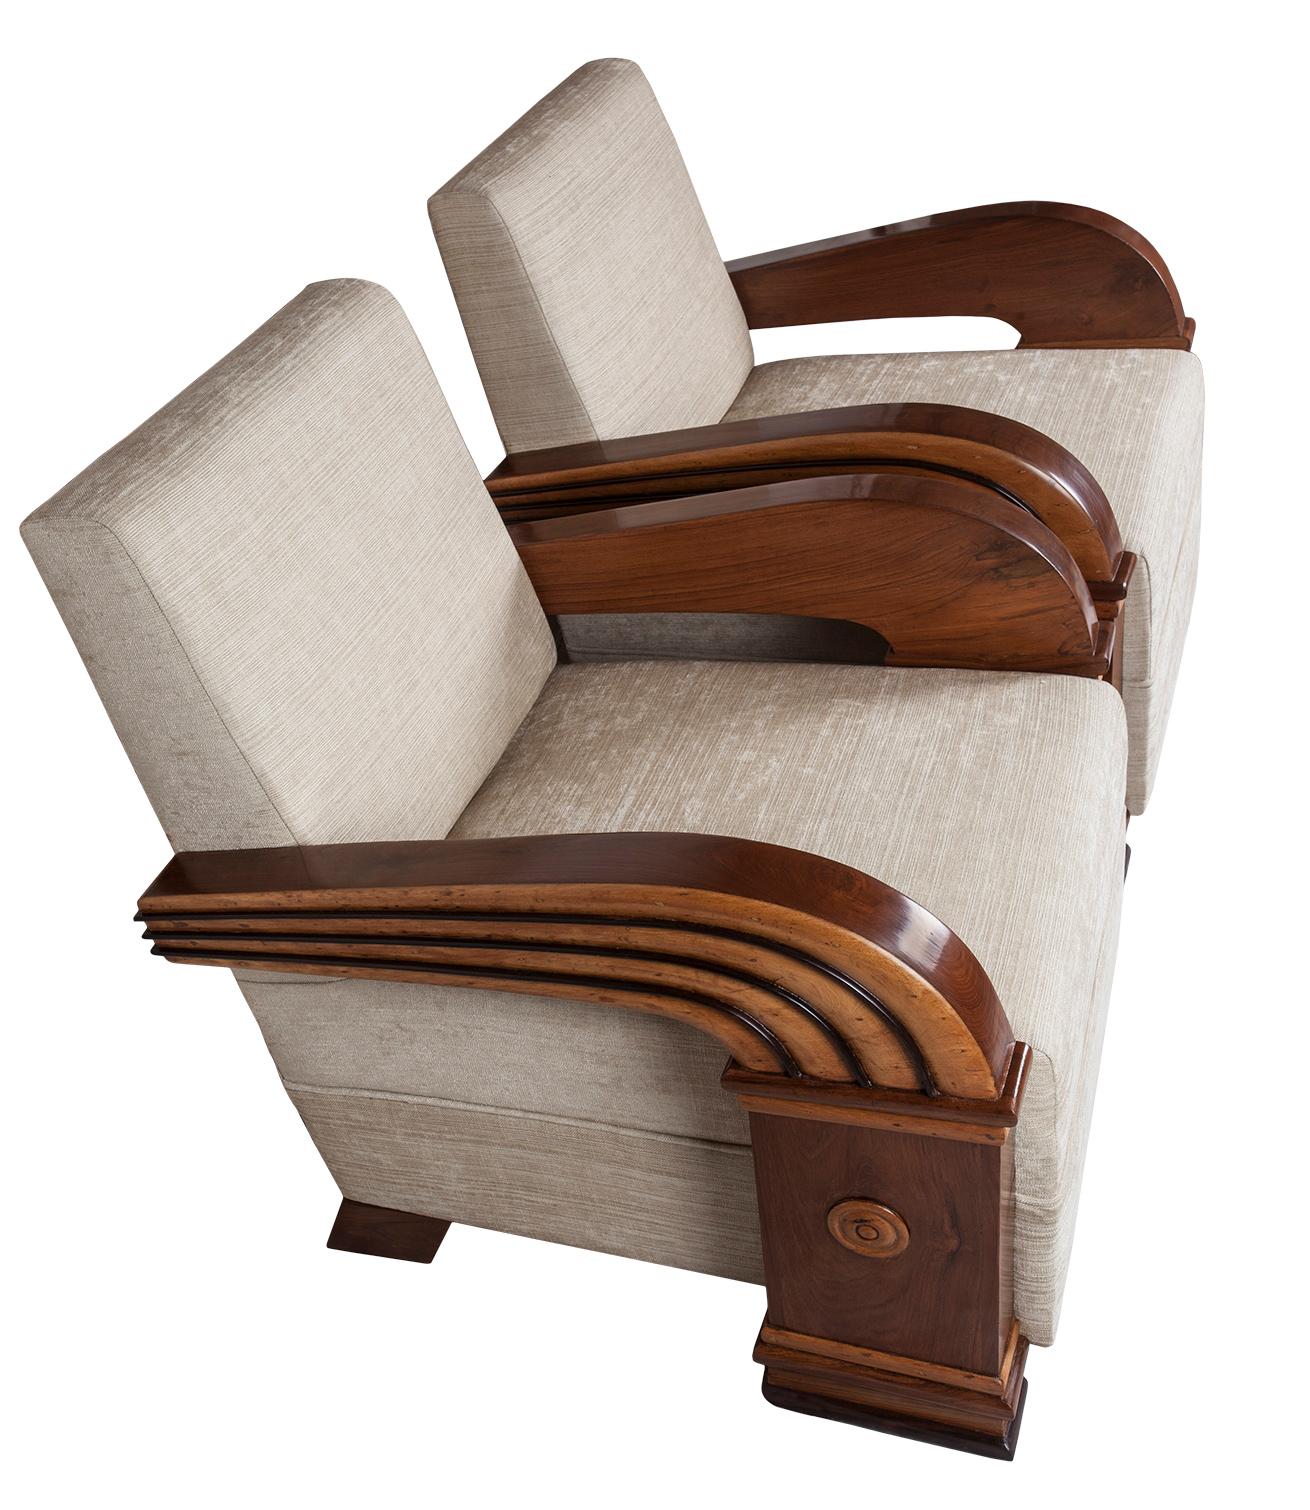 A fabulous find of a late Art Deco living room suite in the art modern streamlined style of the 1930s. The set is comprised of a love-seat and pair of chairs. The sweep of the arms are teak with rosewood accents. European. Reupholstered with a